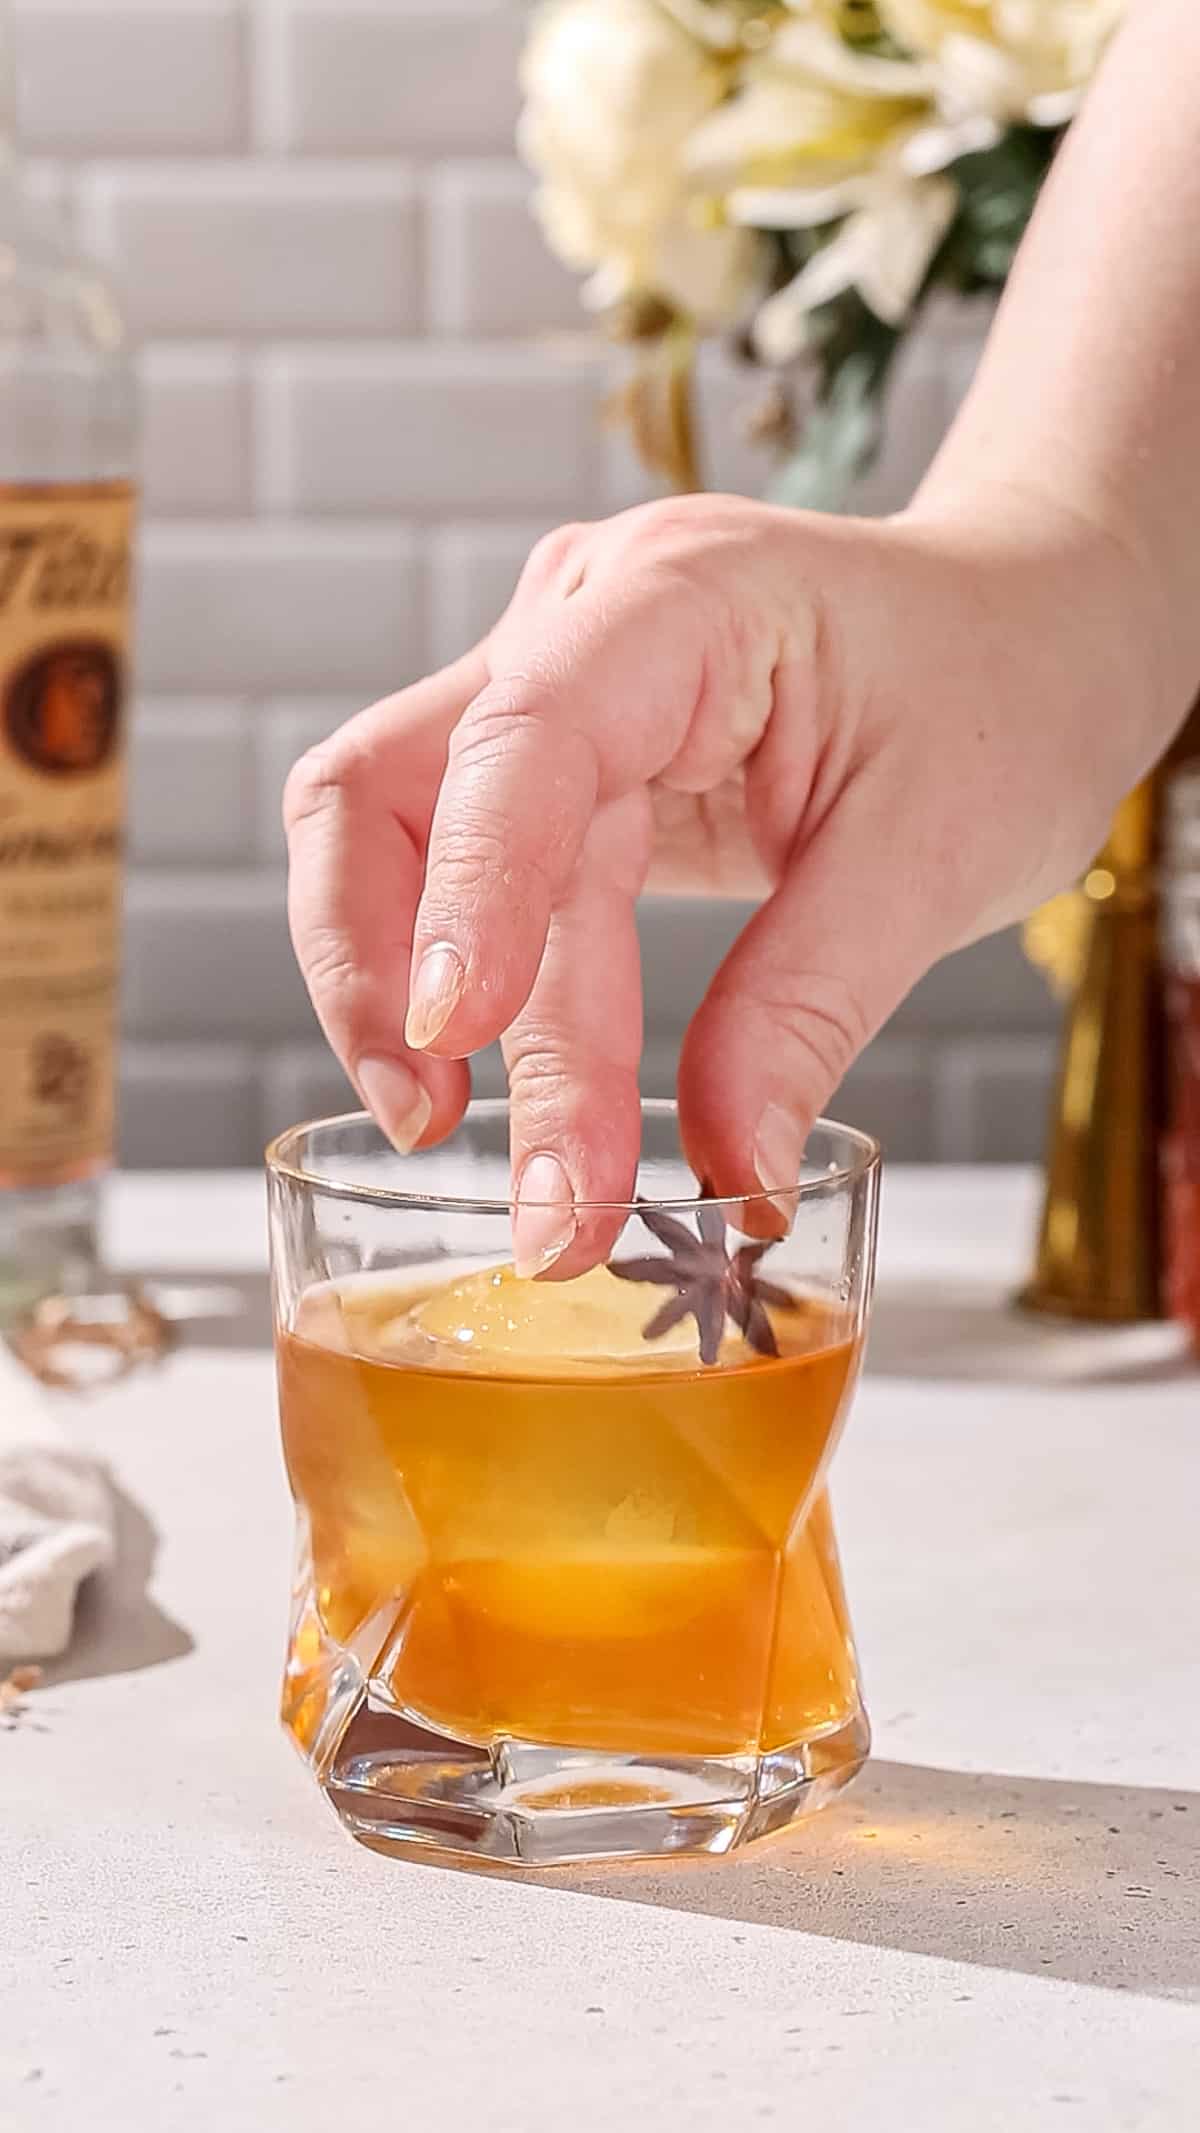 Hand adding a star anise as garnish to a cocktail.